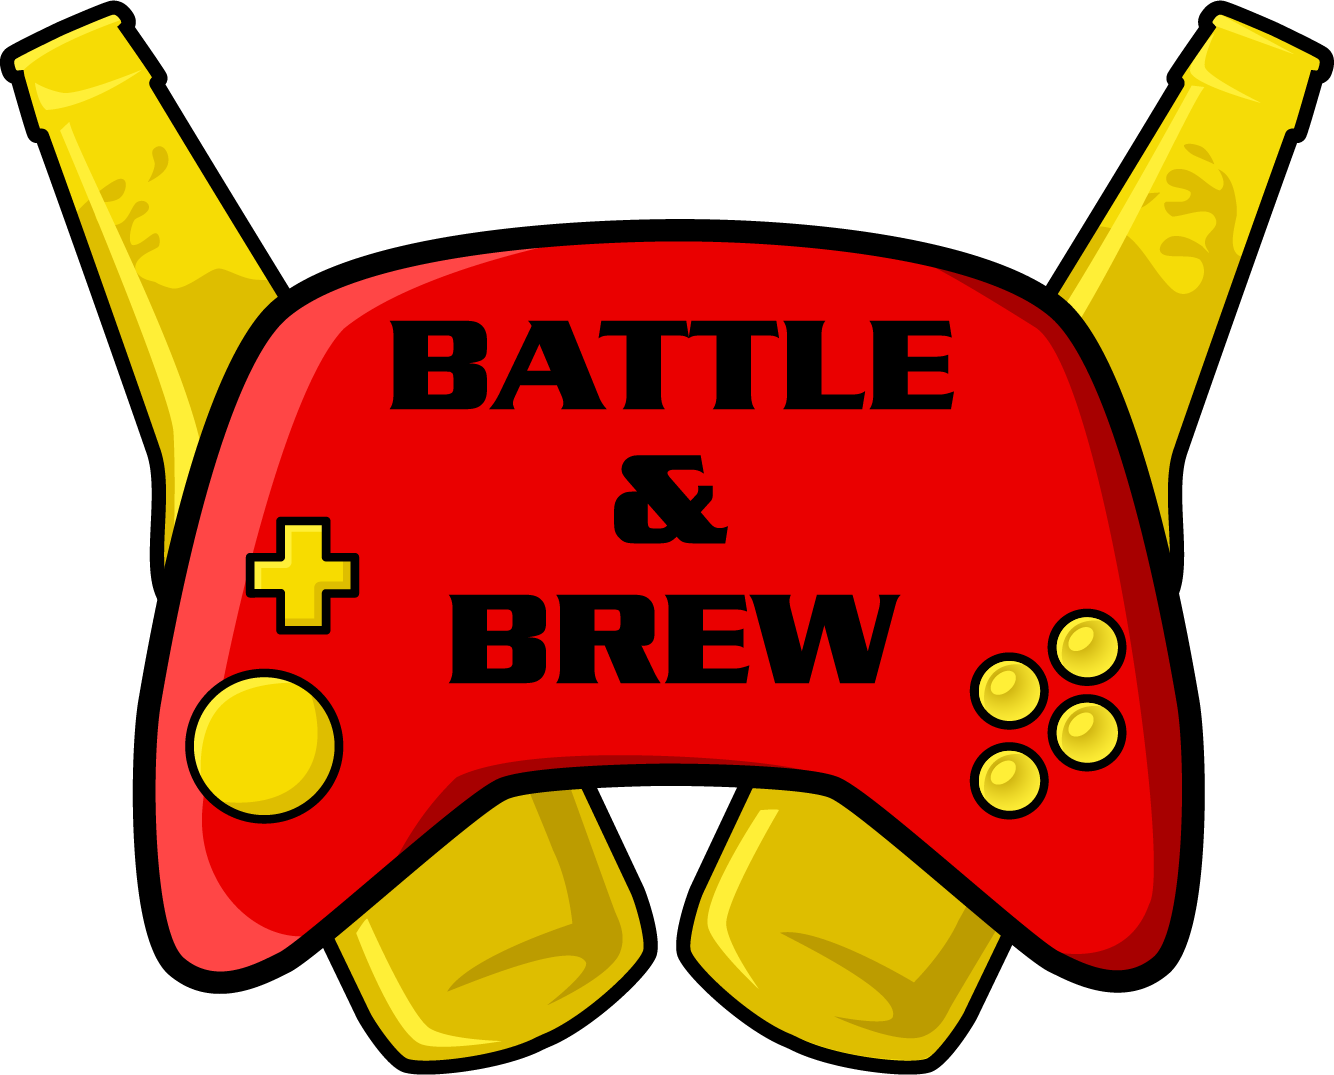 Video Game Restaurant and Fun! | Video and Board Gaming Venue - Restaurant and Drinks | Battle &amp; Brew